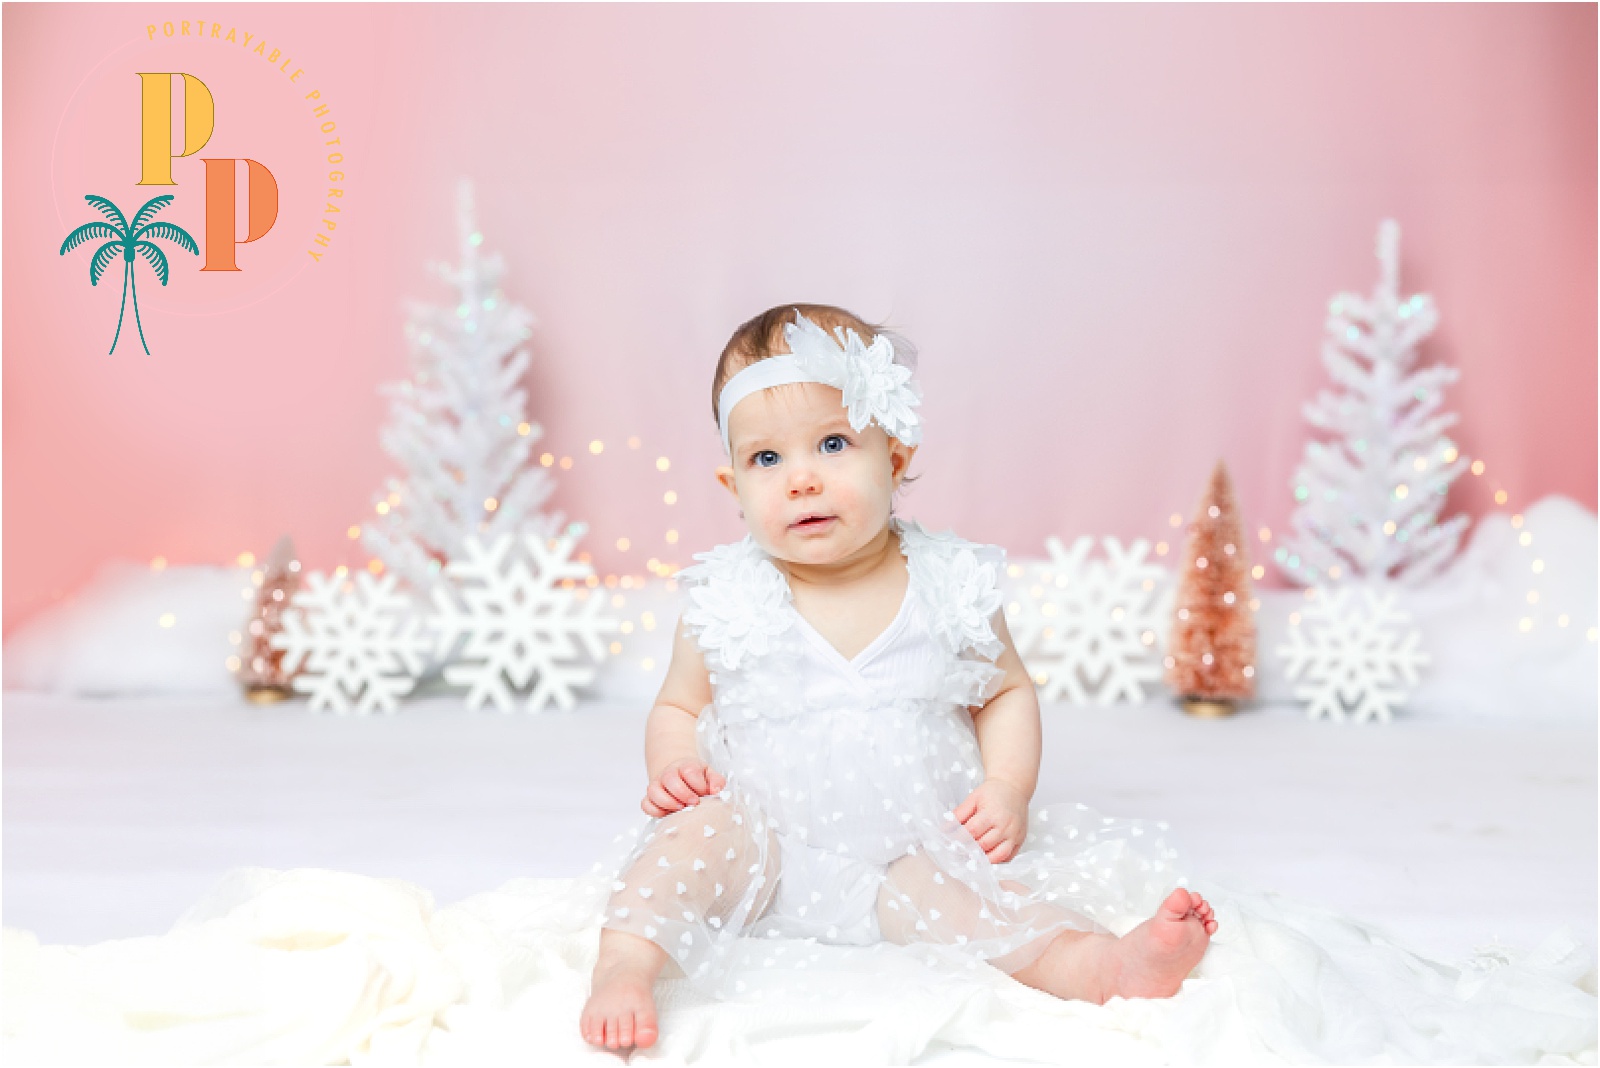 Charming images of a little snow princess's cake smash session, expertly photographed by an Orlando Cakesmash Photographer, featuring a delightful blend of pink hues and snowy magic.